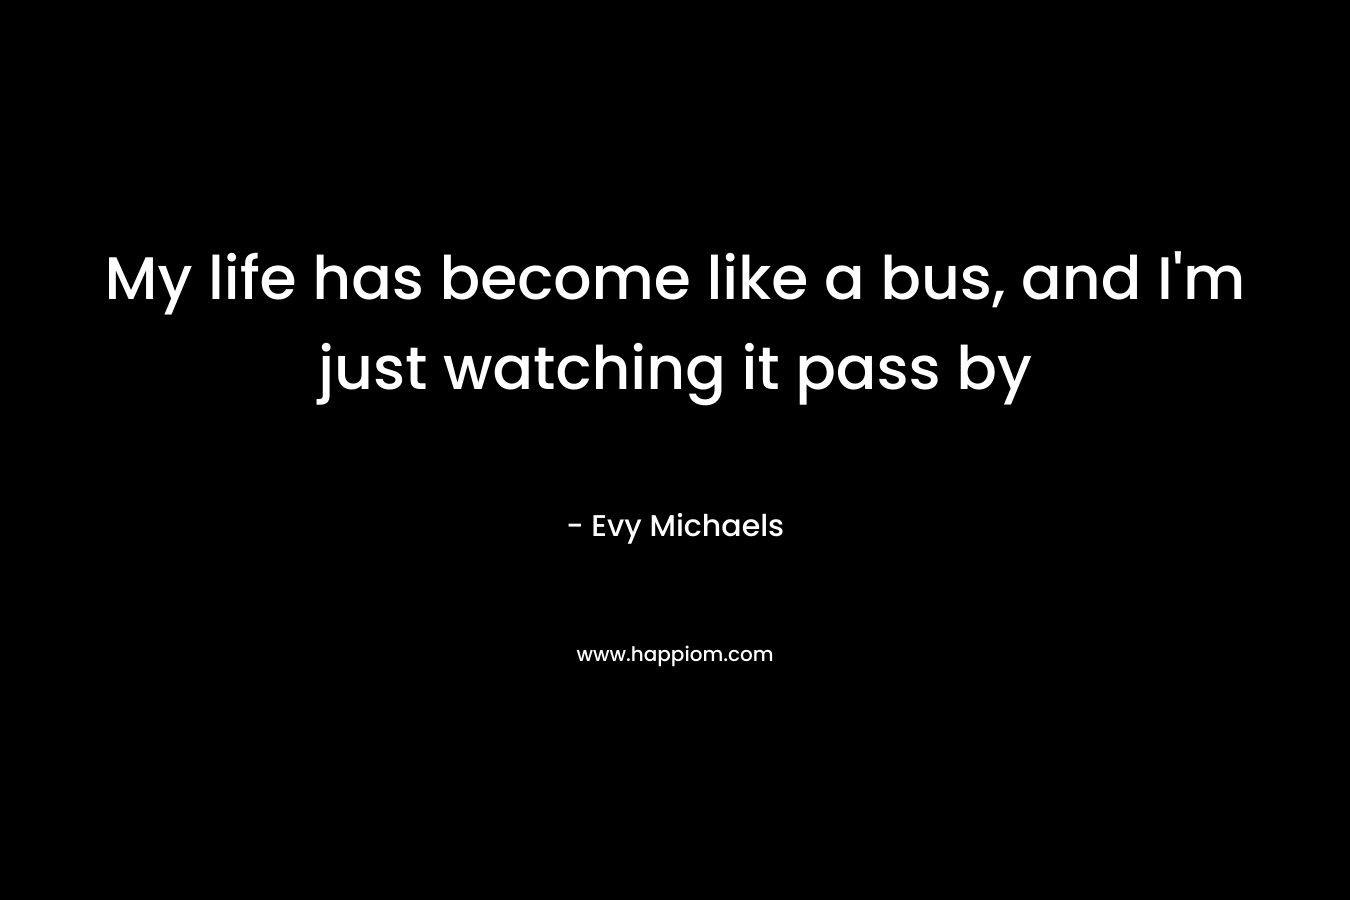 My life has become like a bus, and I’m just watching it pass by – Evy Michaels